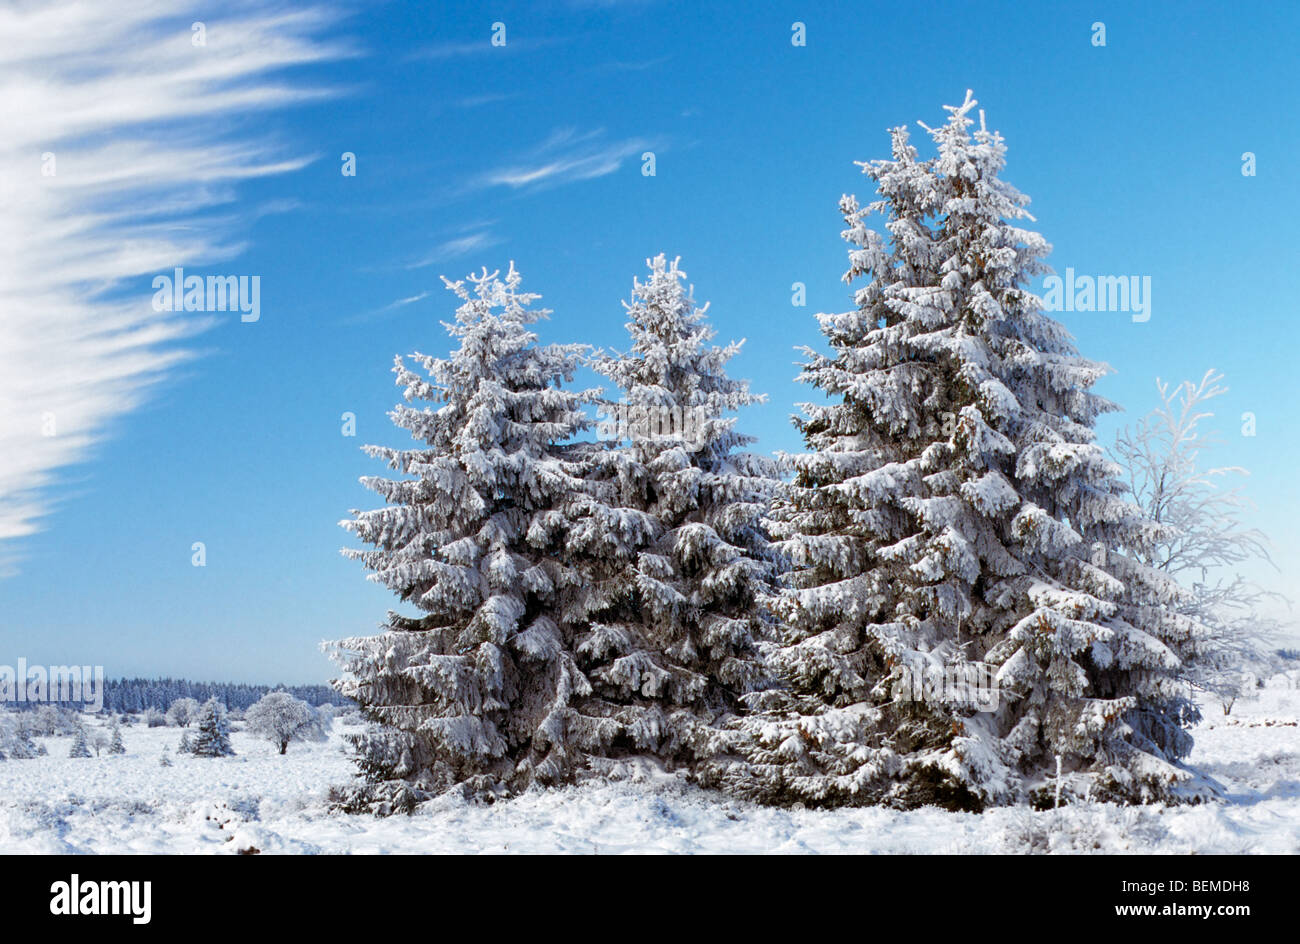 Spruce trees covered in snow in winter, High Fens / Hautes Fagnes, Belgian Ardennes, Belgium Stock Photo